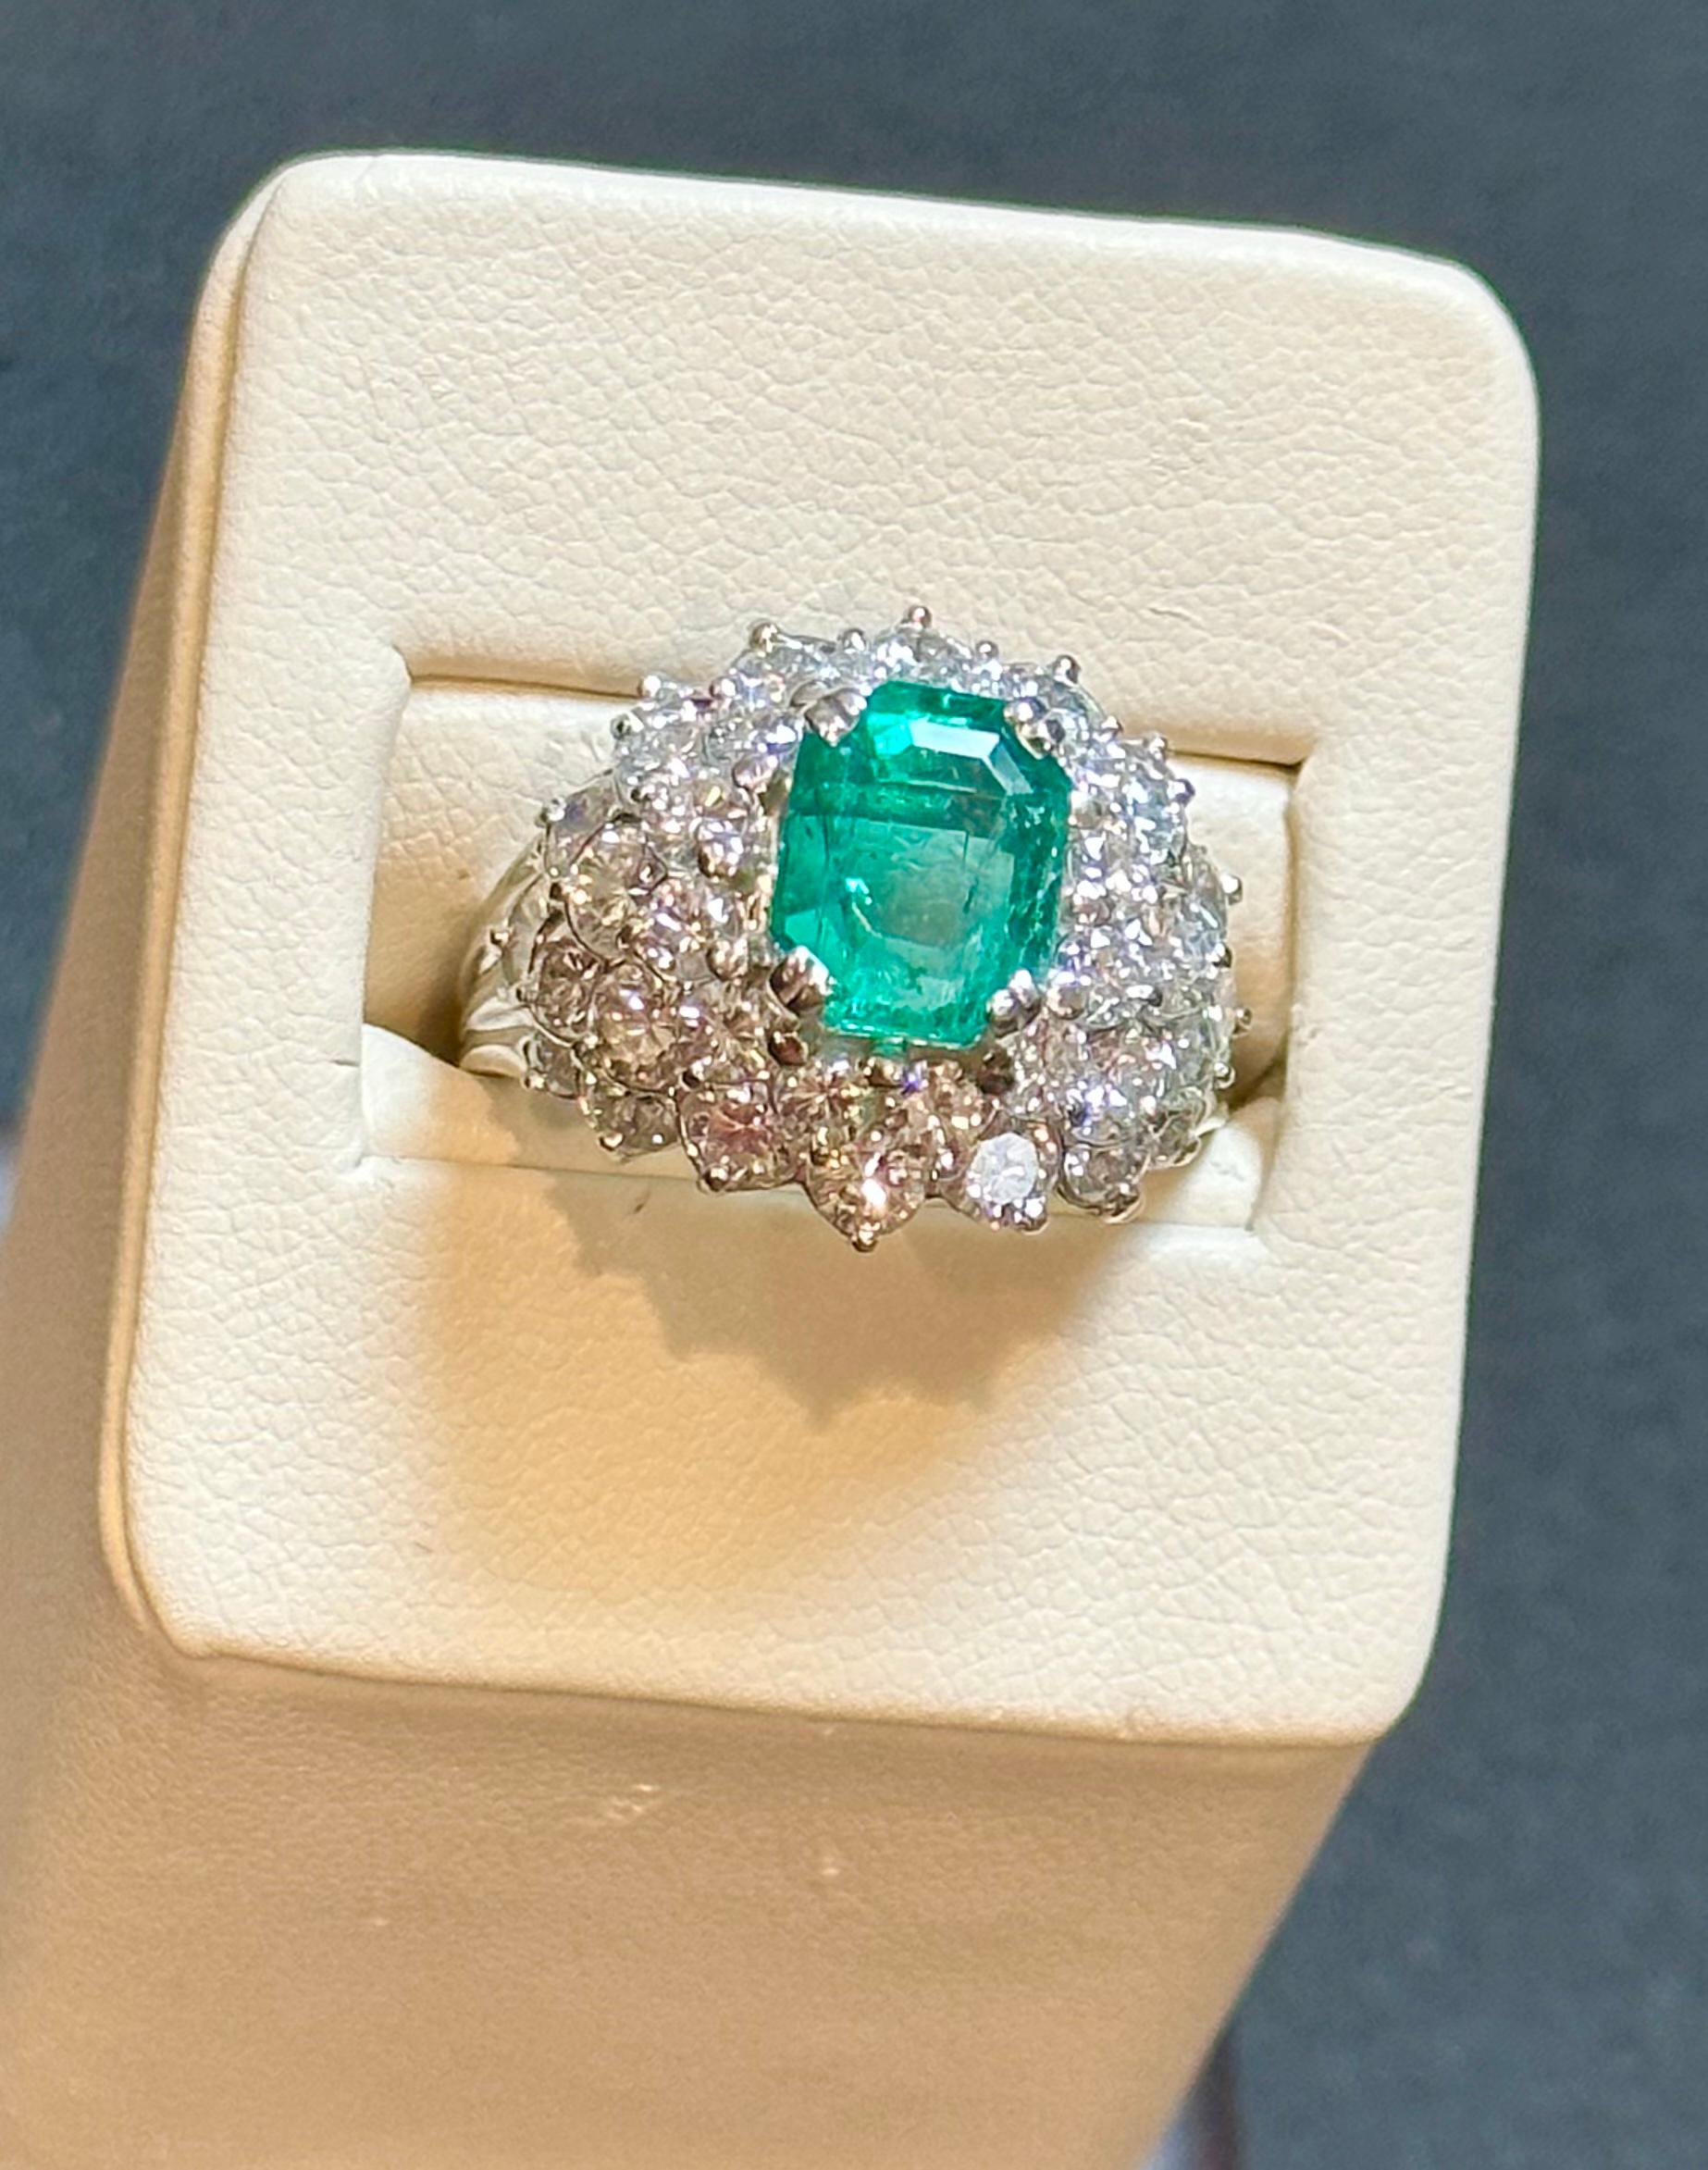 Women's GIA Certified 2.5ct Emerald Cut Colombian Emerald Diamond Ring 18kt White Gold For Sale